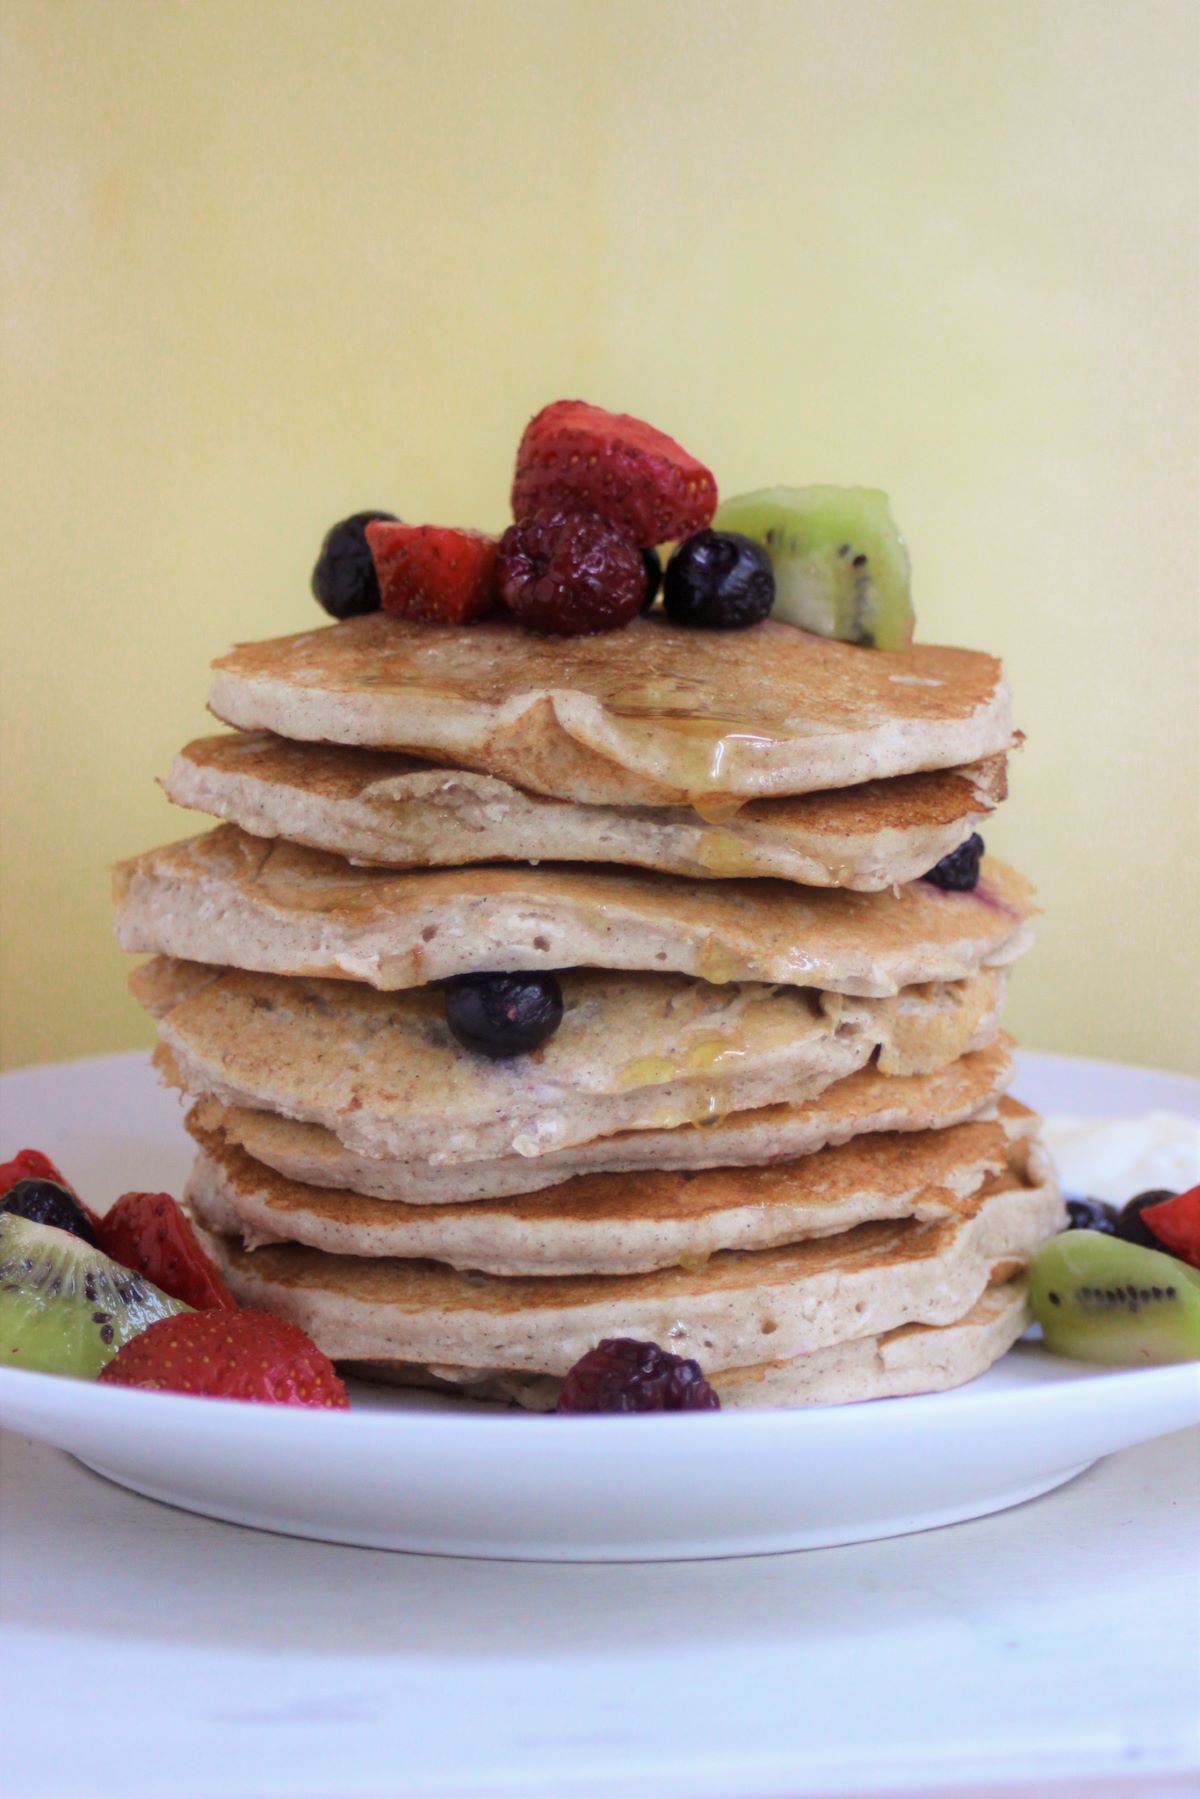 A tower of pancakes with strawberries, blueberries, and kiwis on a white dish.